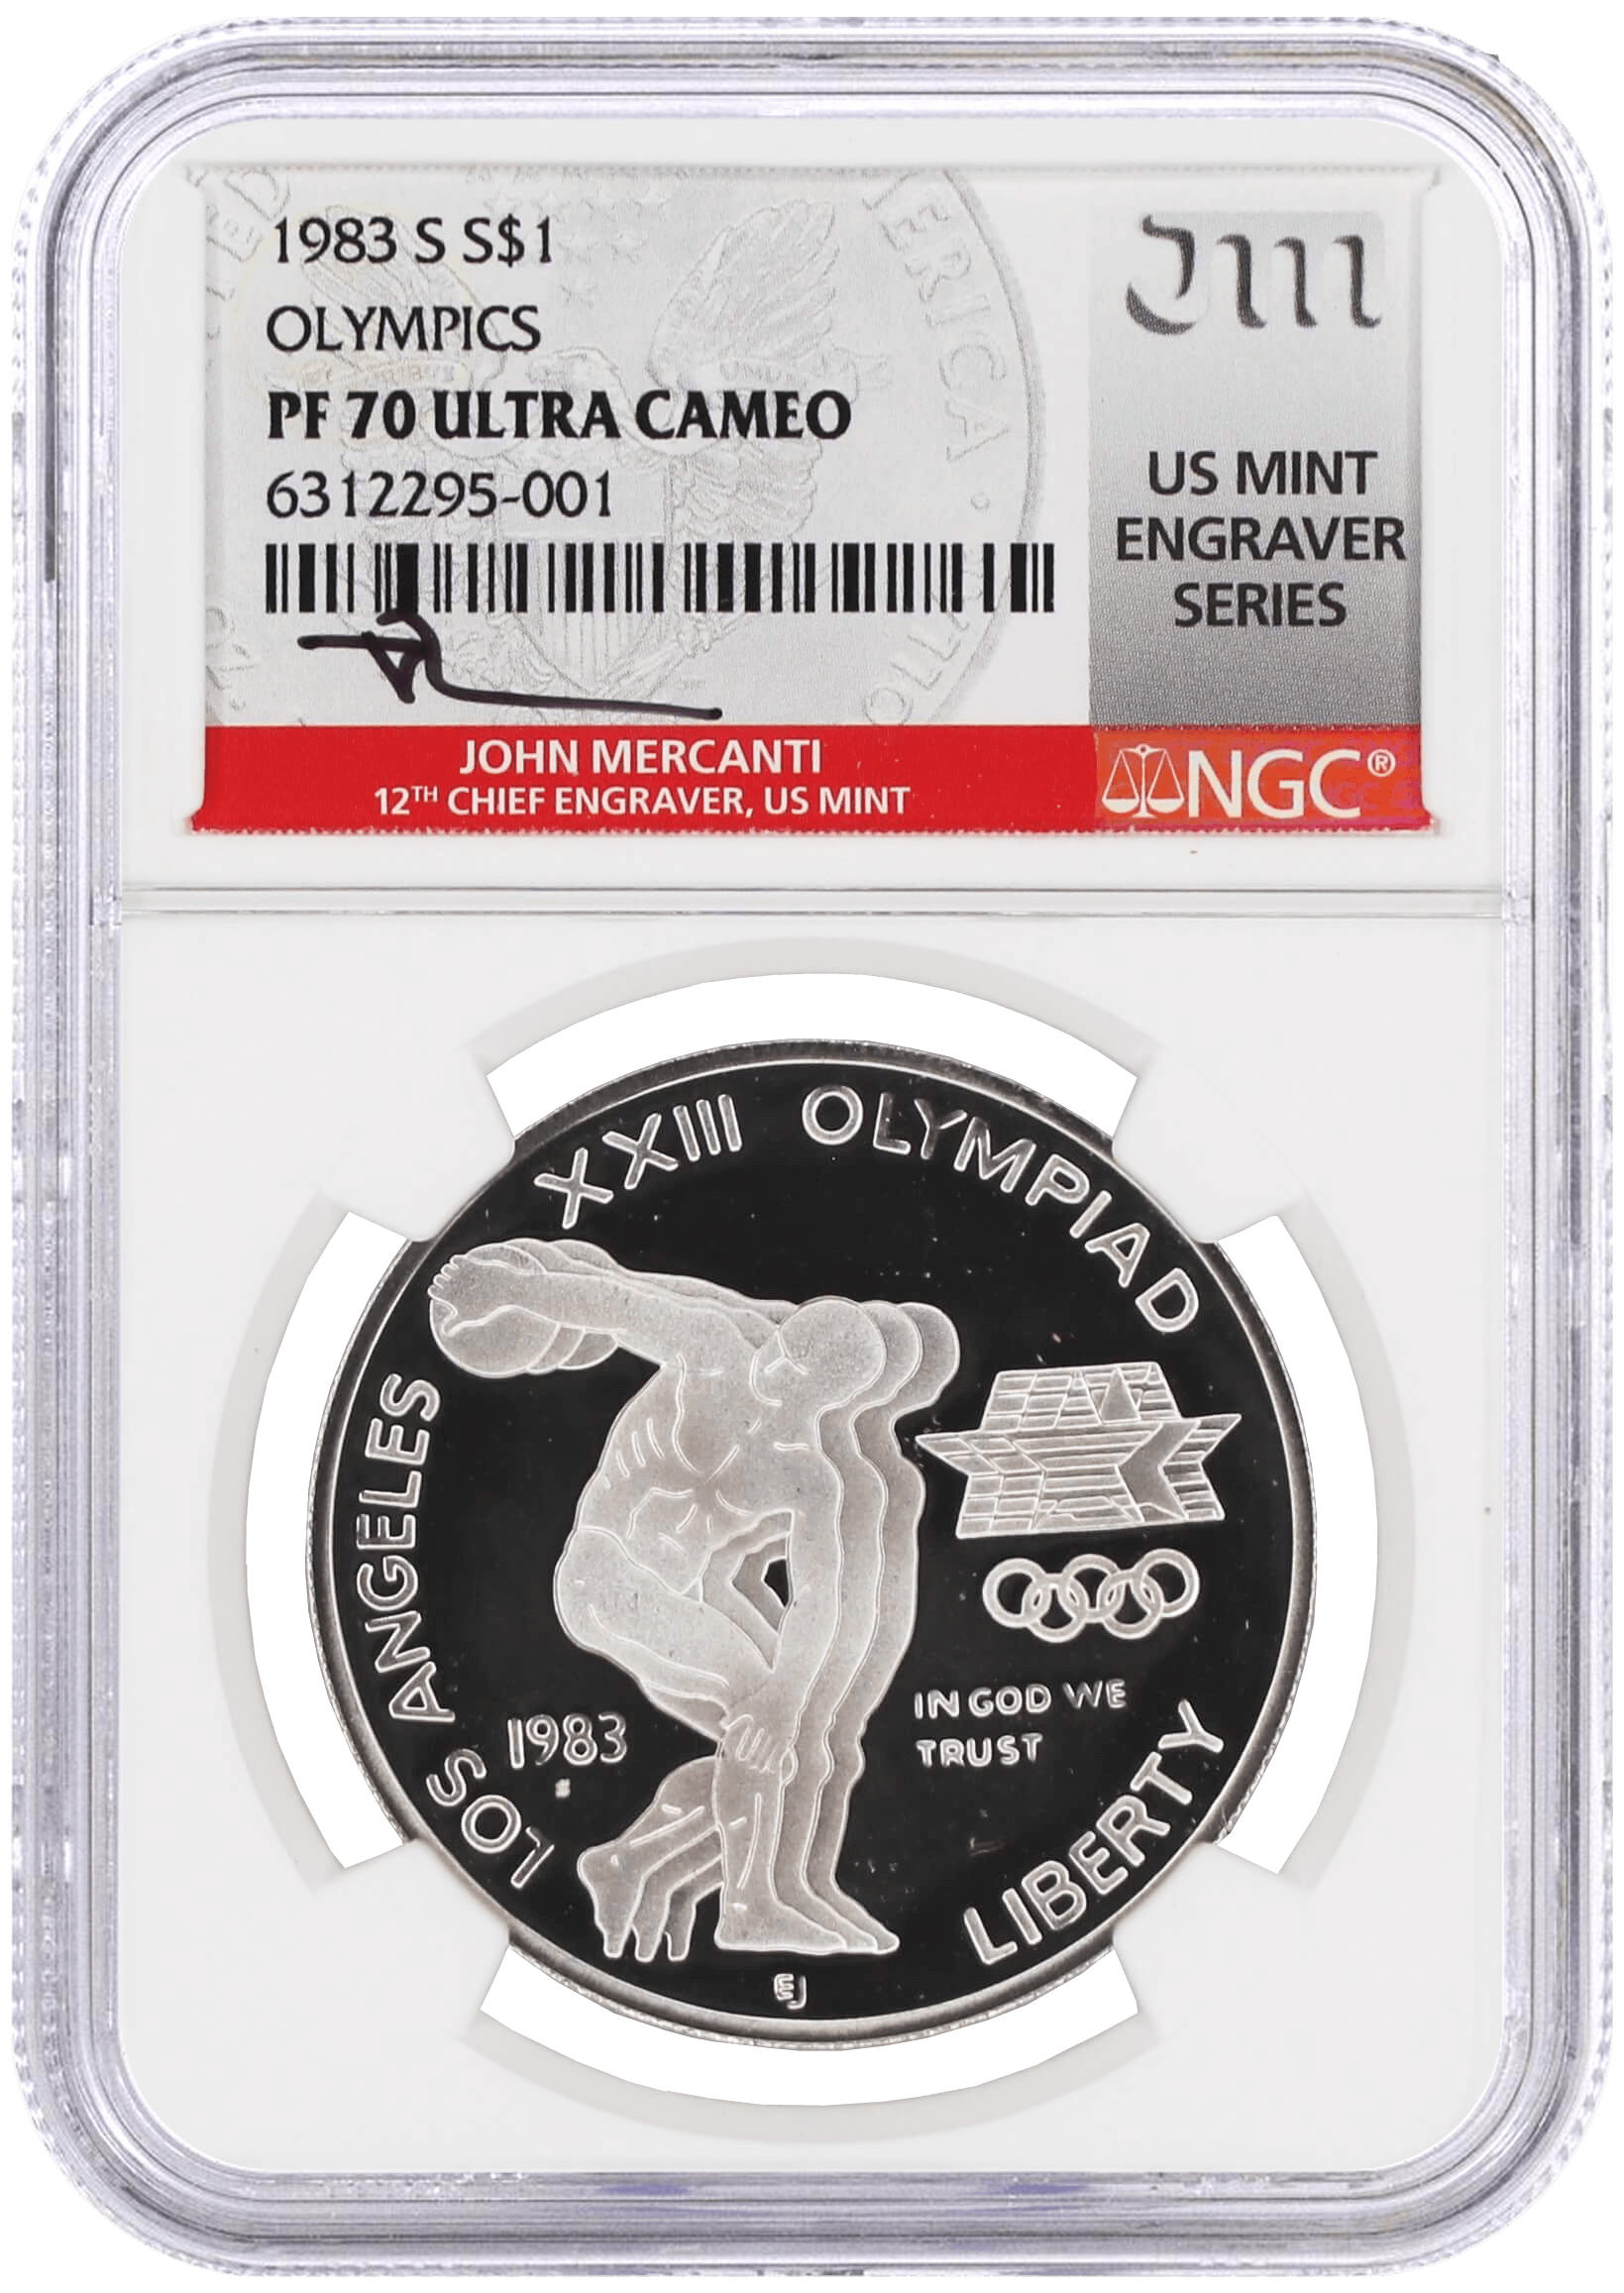 1983 S $1 Proof Silver Los Angeles Olympiad NGC PF70 UCAM Mercanti Signed U.S. Mint Engraver Series Masters Collection